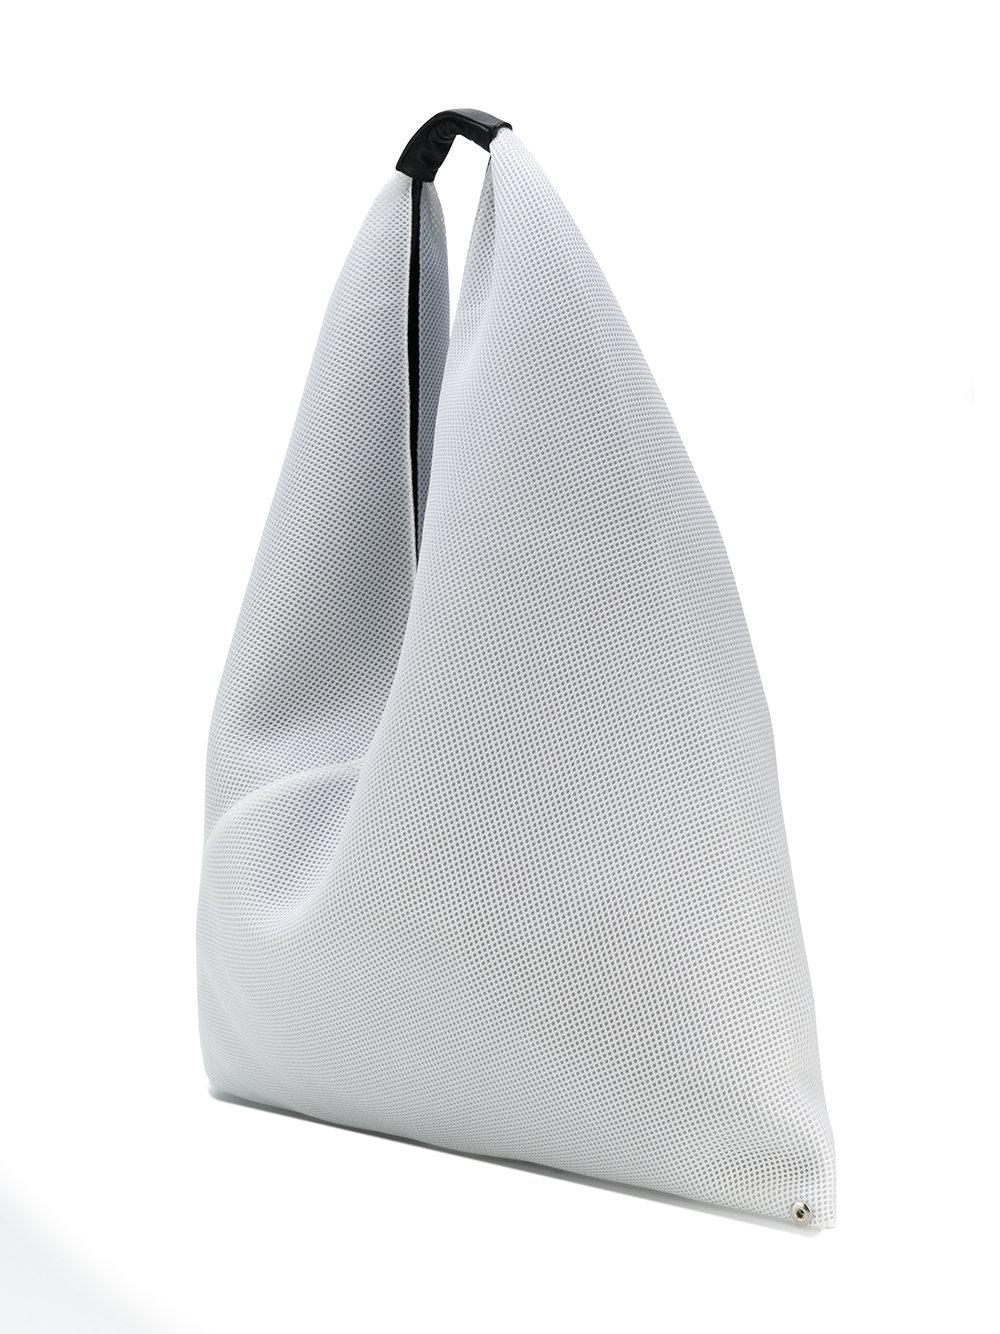 MM6 by Maison Martin Margiela Japanese Tote Bag in White - Lyst